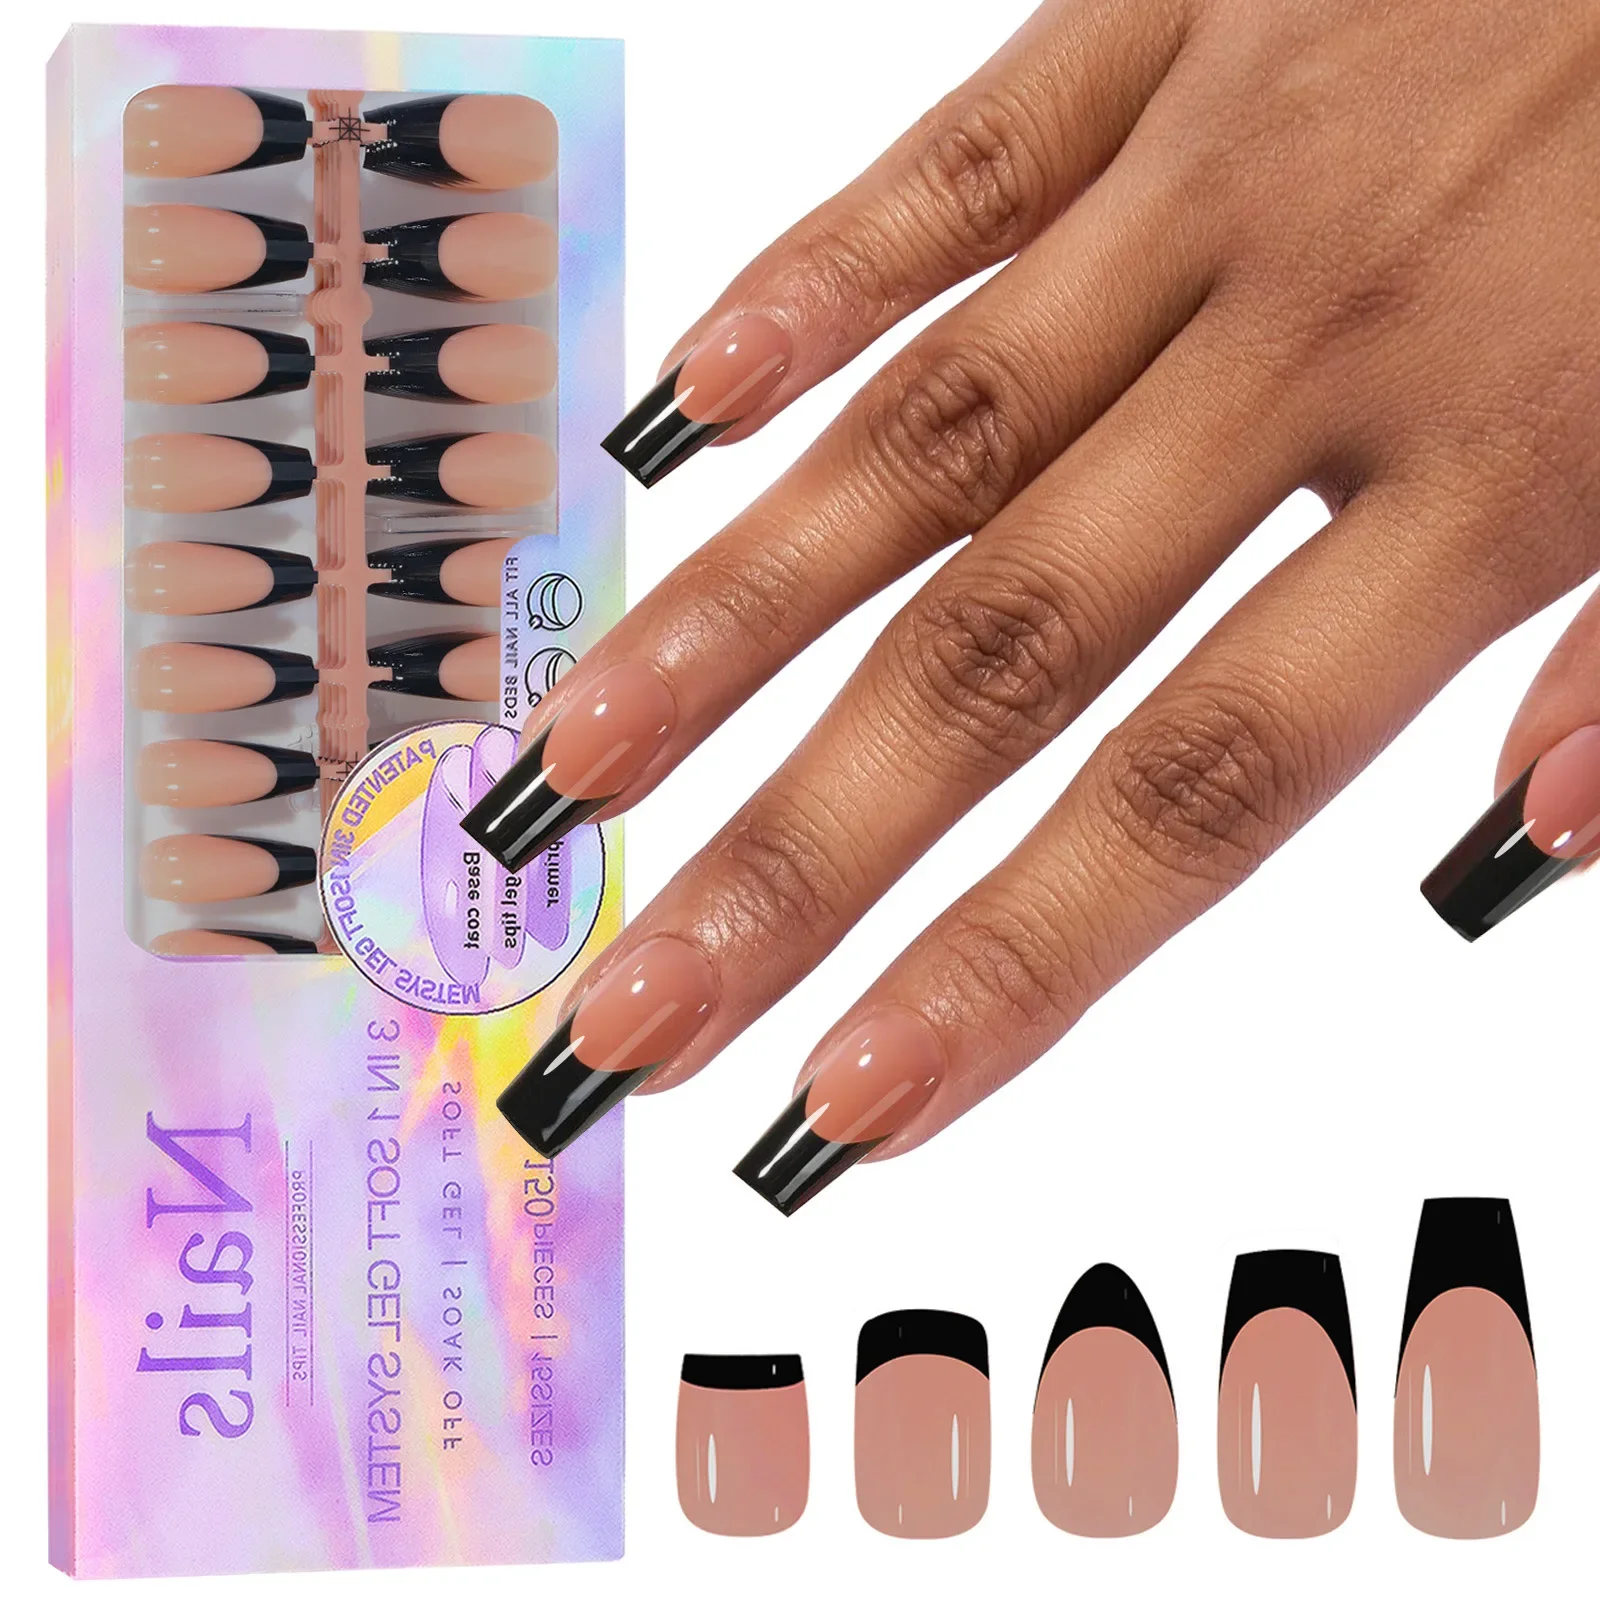 150pcs/box French Coffee Black False Nail Press On Acrylic Nails Almond Removable Nails Art Tools For DIY Manicure Design